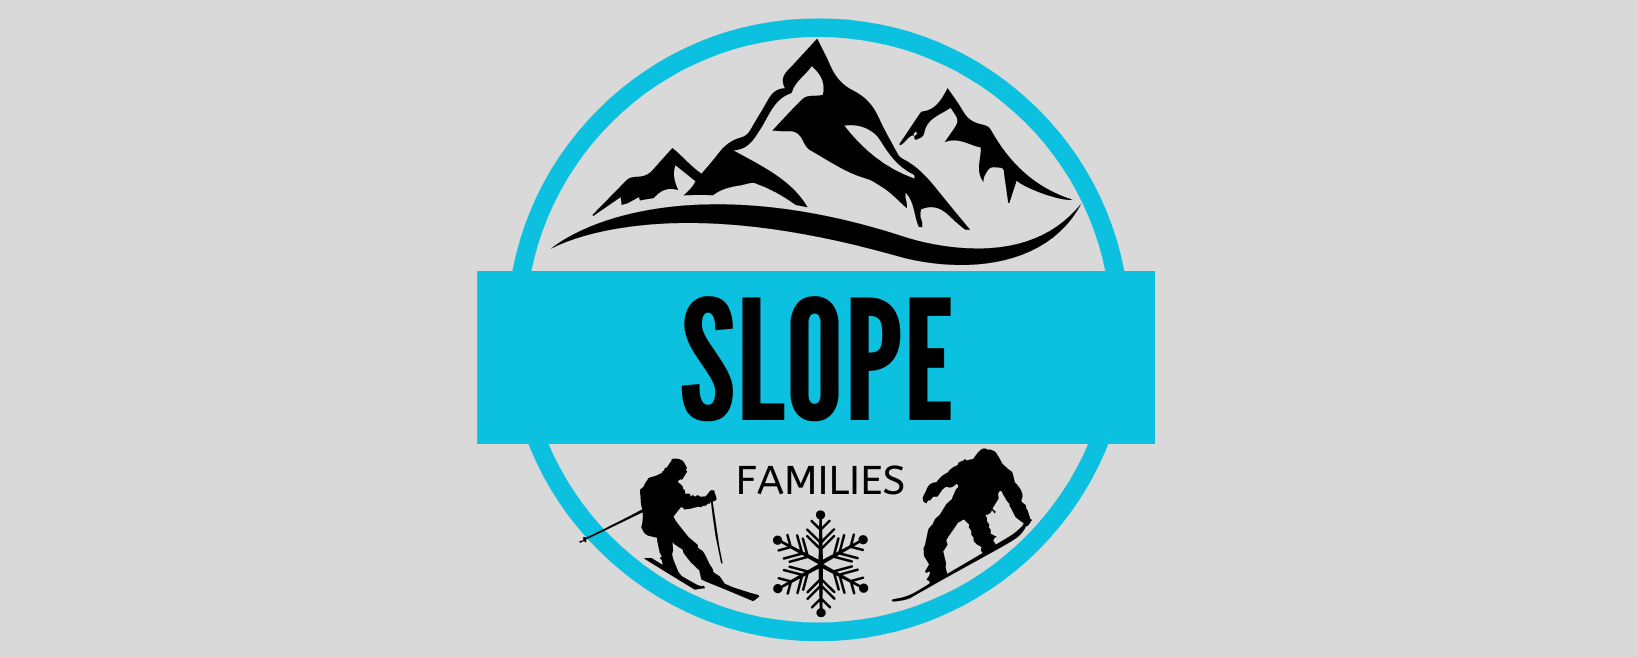 SLOPE FAMILIES